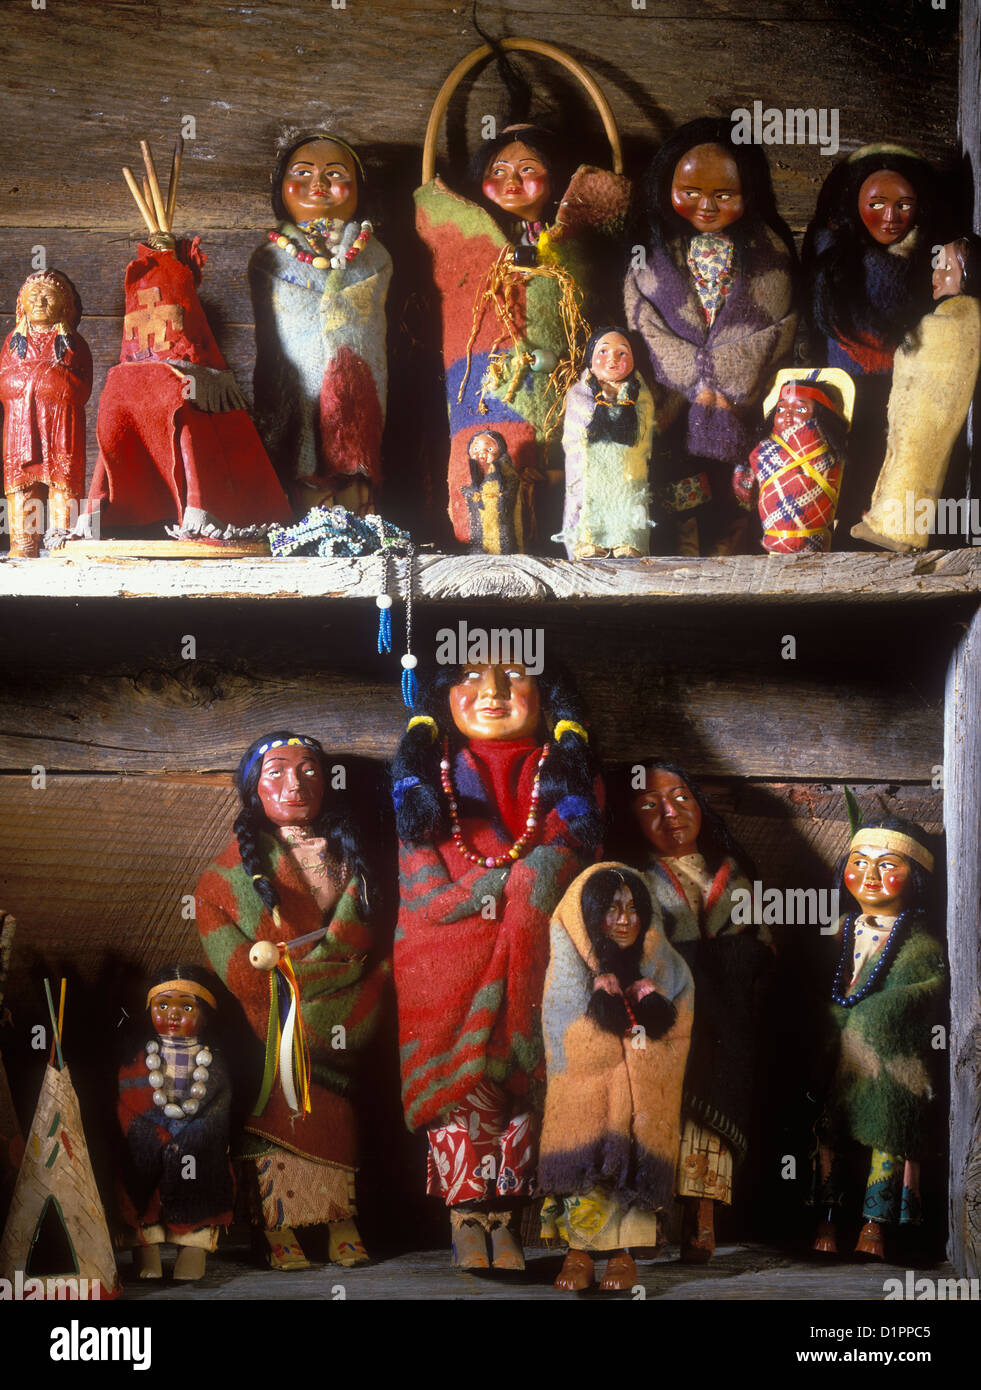 COLLECTION DISPLAYS - Vintage Native American dolls on display on shelves in rustic log home. Very colorful. Stock Photo